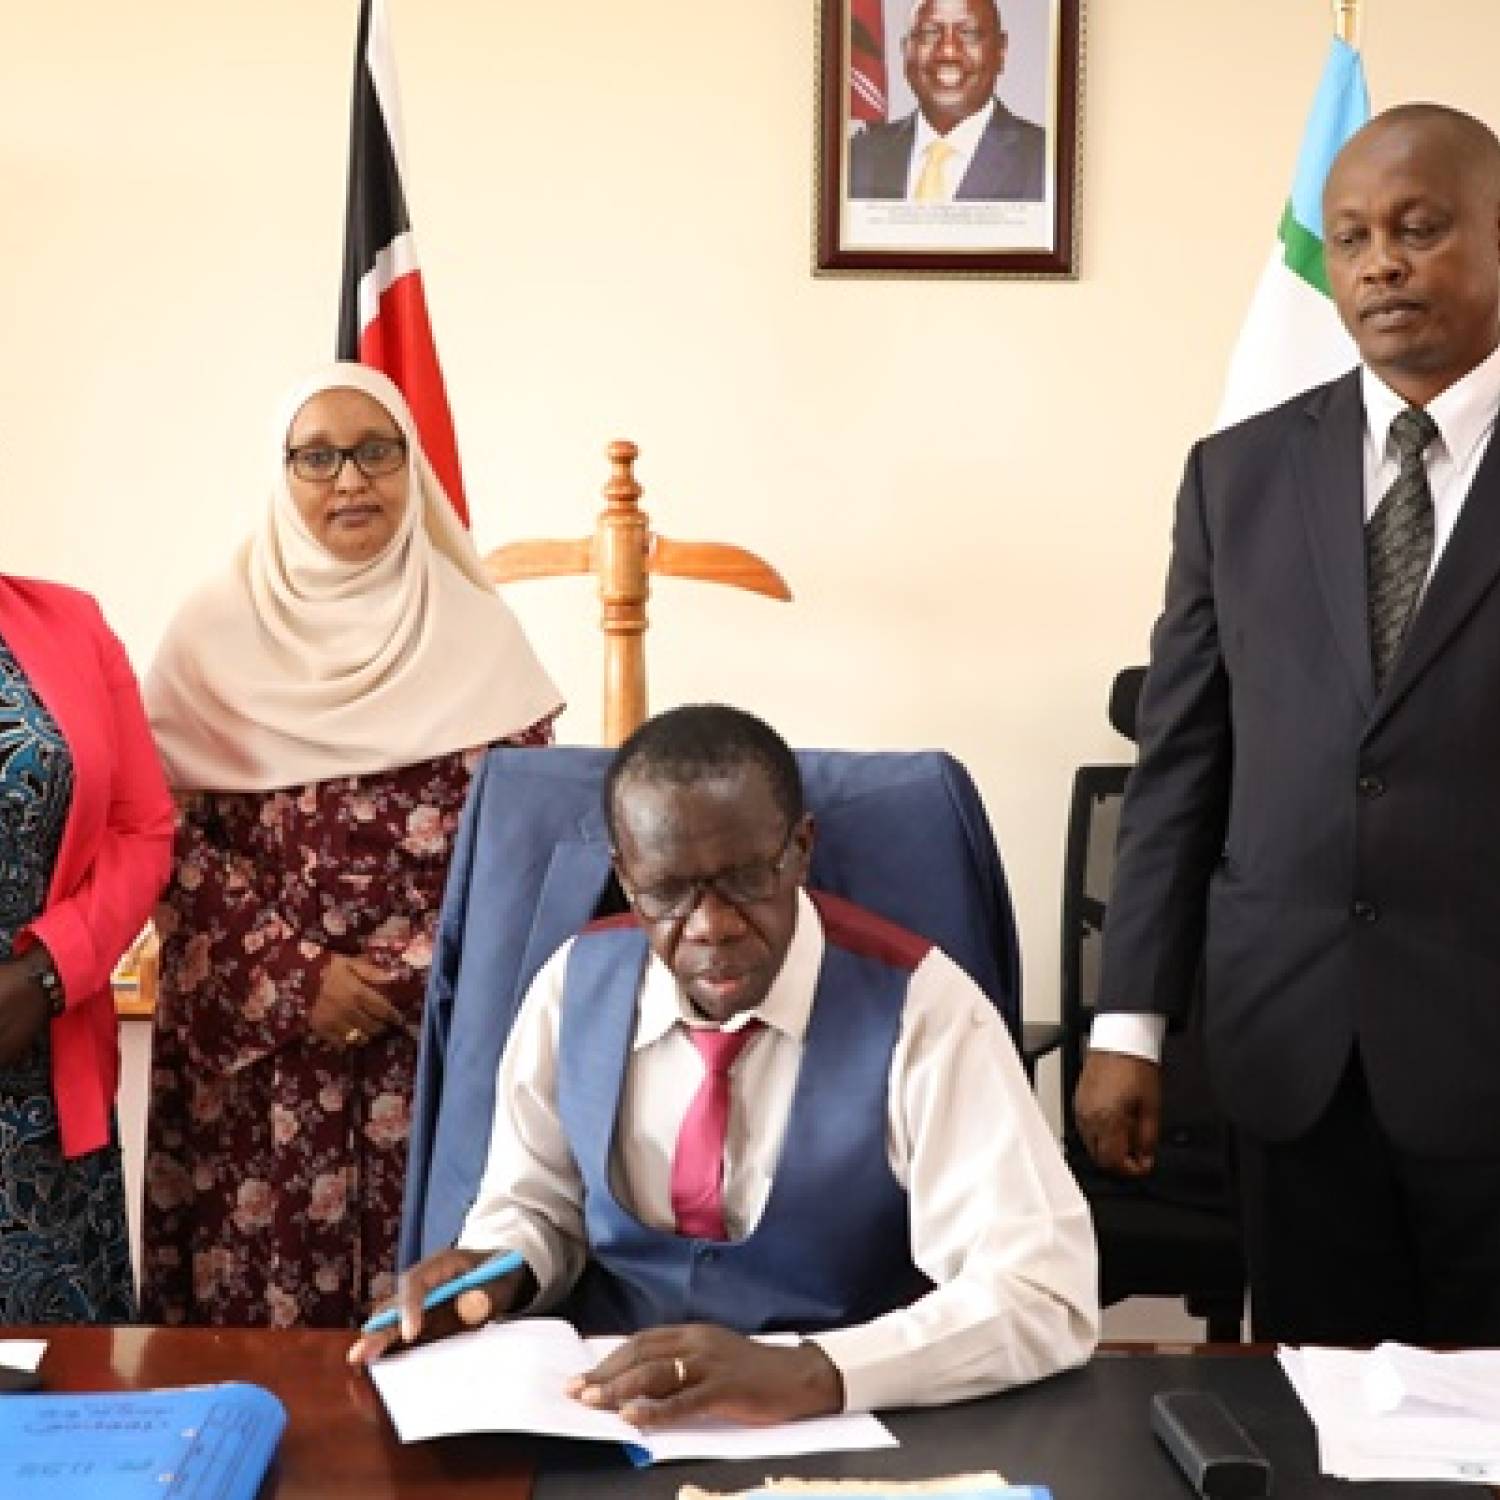 MMUST Signs MOU with West Media Limited as the Two Partner to Catalyze Research, Knowledge-sharing and Media Growth in the Region.